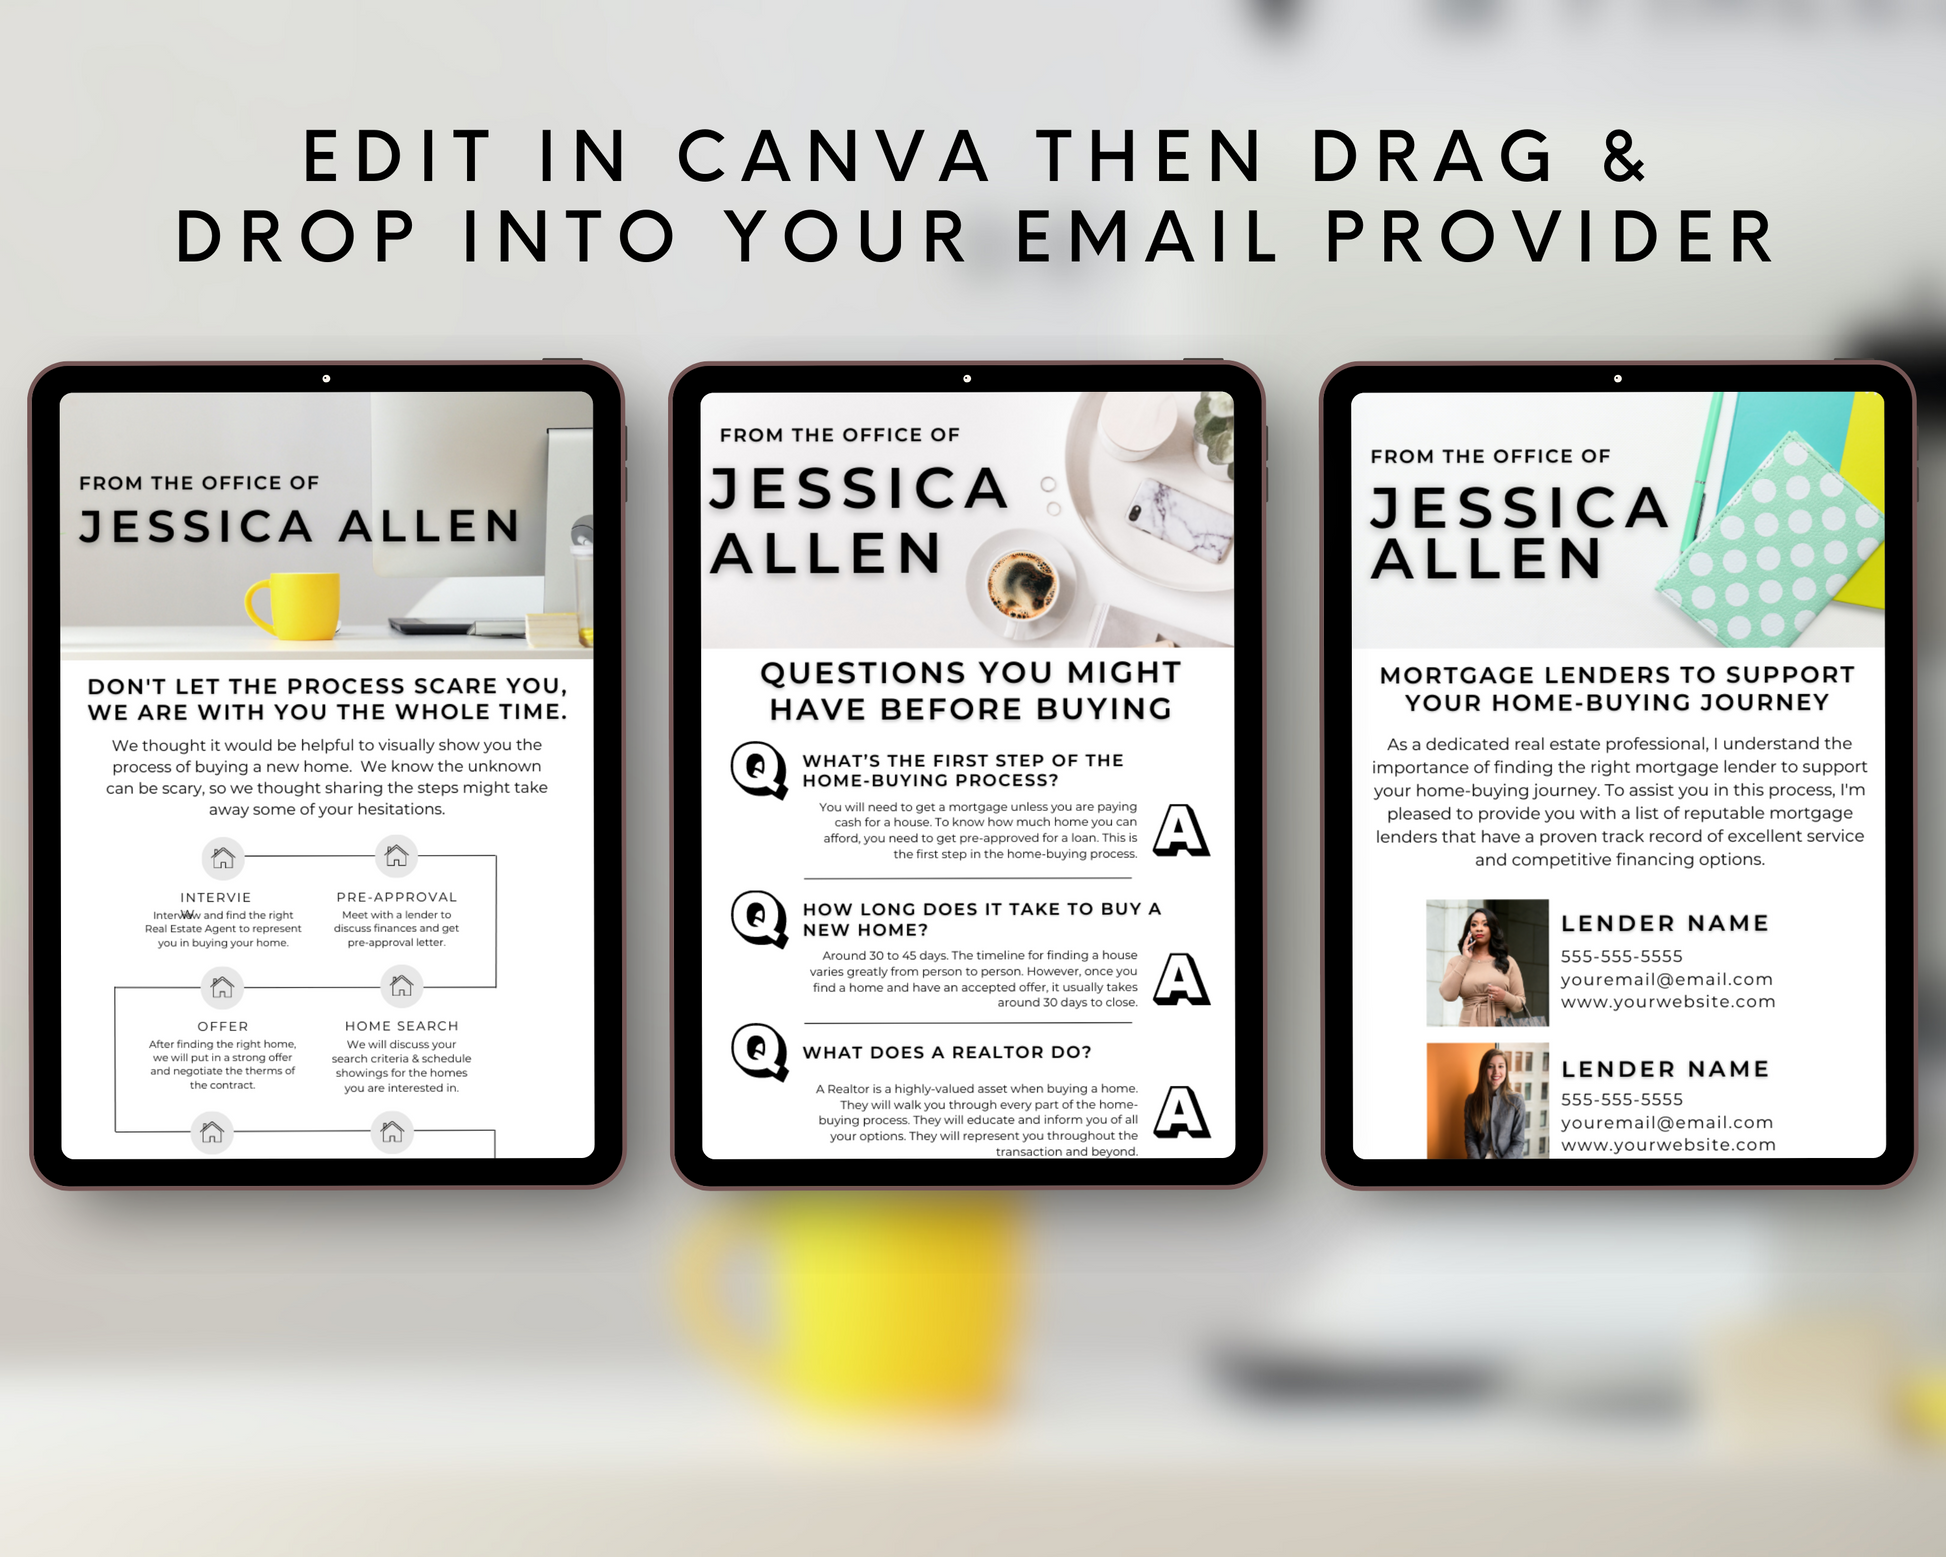 Buyer Email Drip Campaign - Real Estate Email Templates